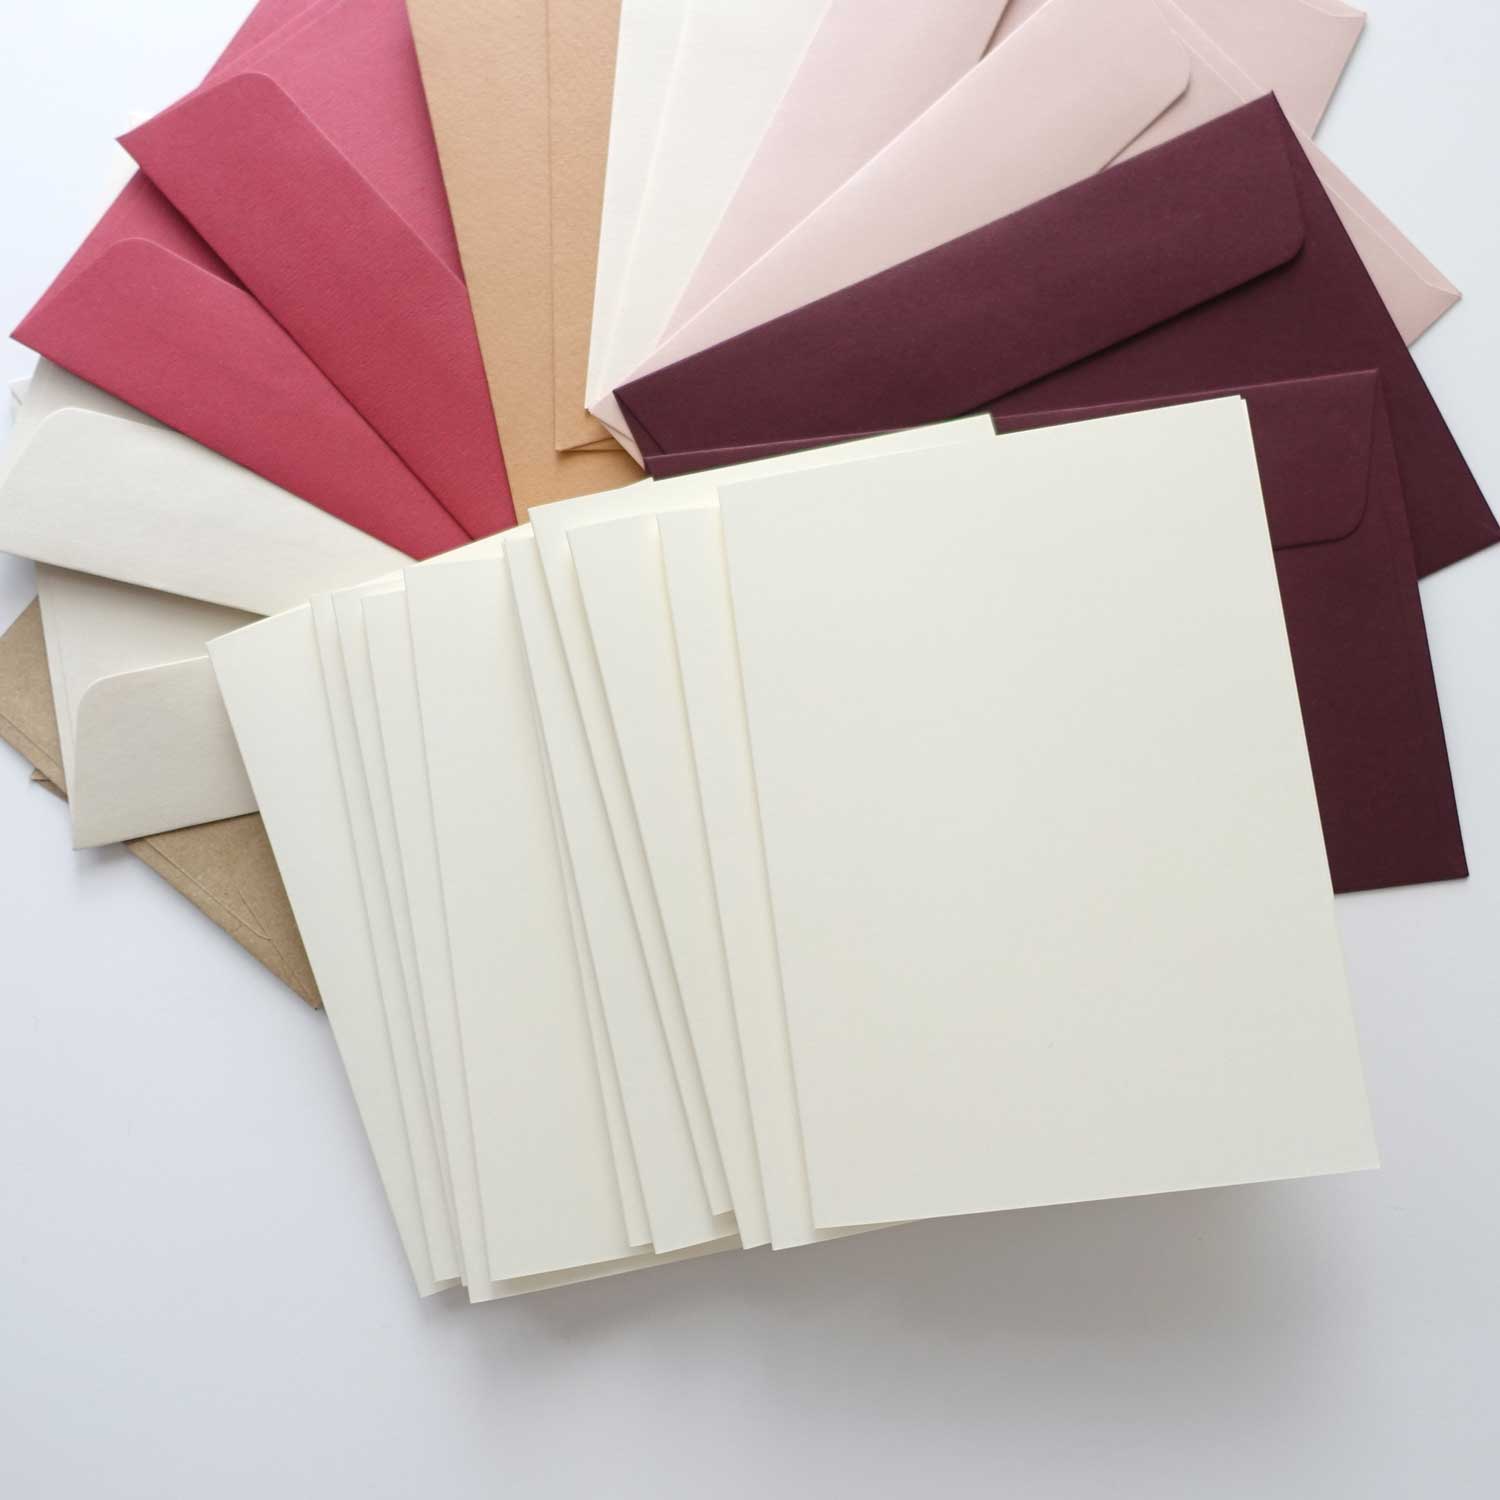 Cream blank cards with assorted pink envelopes